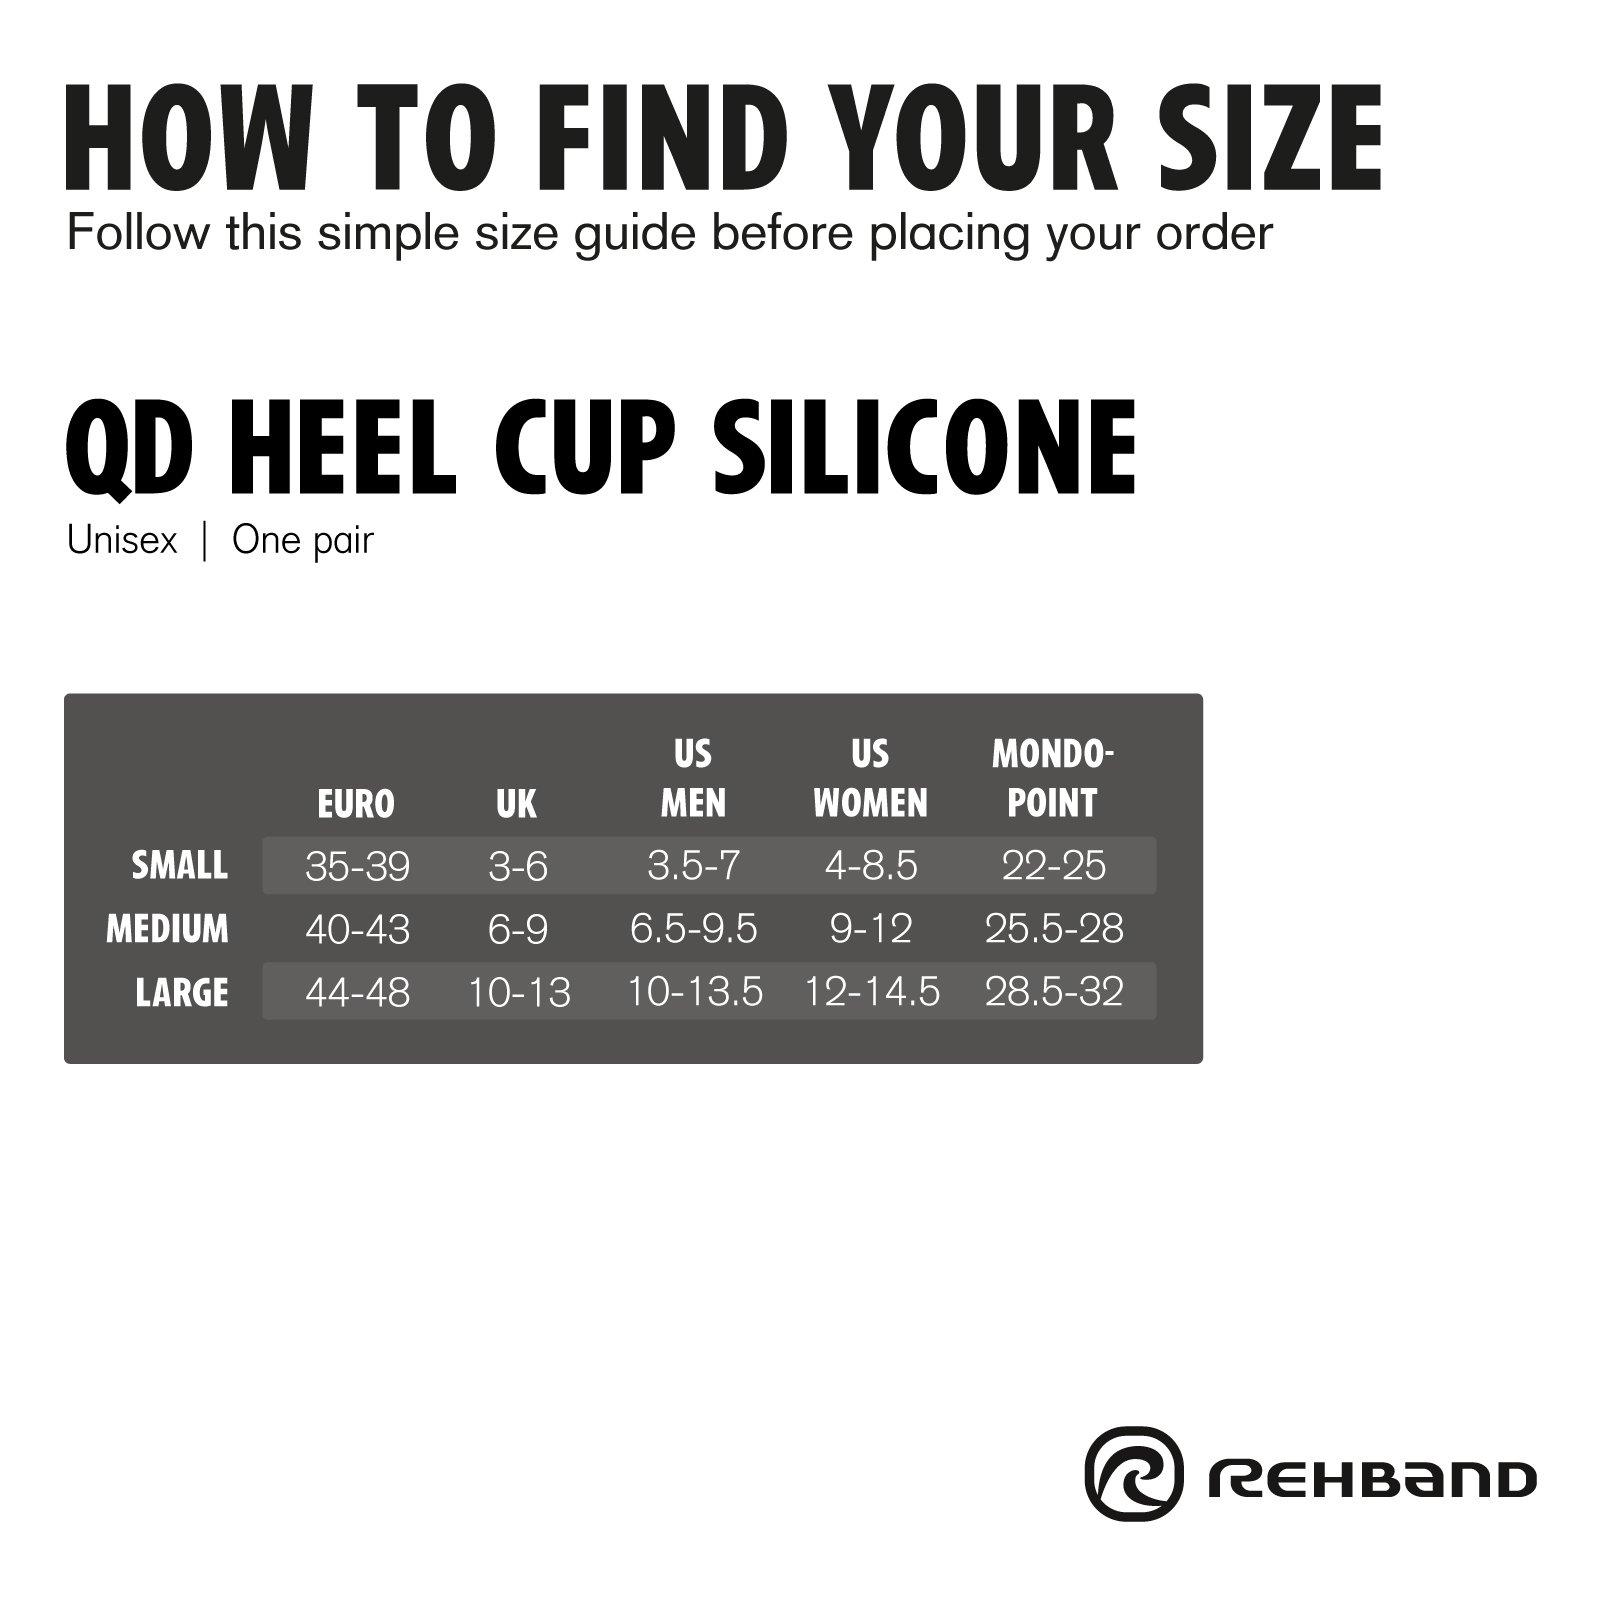 size-guide-rehband-qd-heel-cup-silicone-en